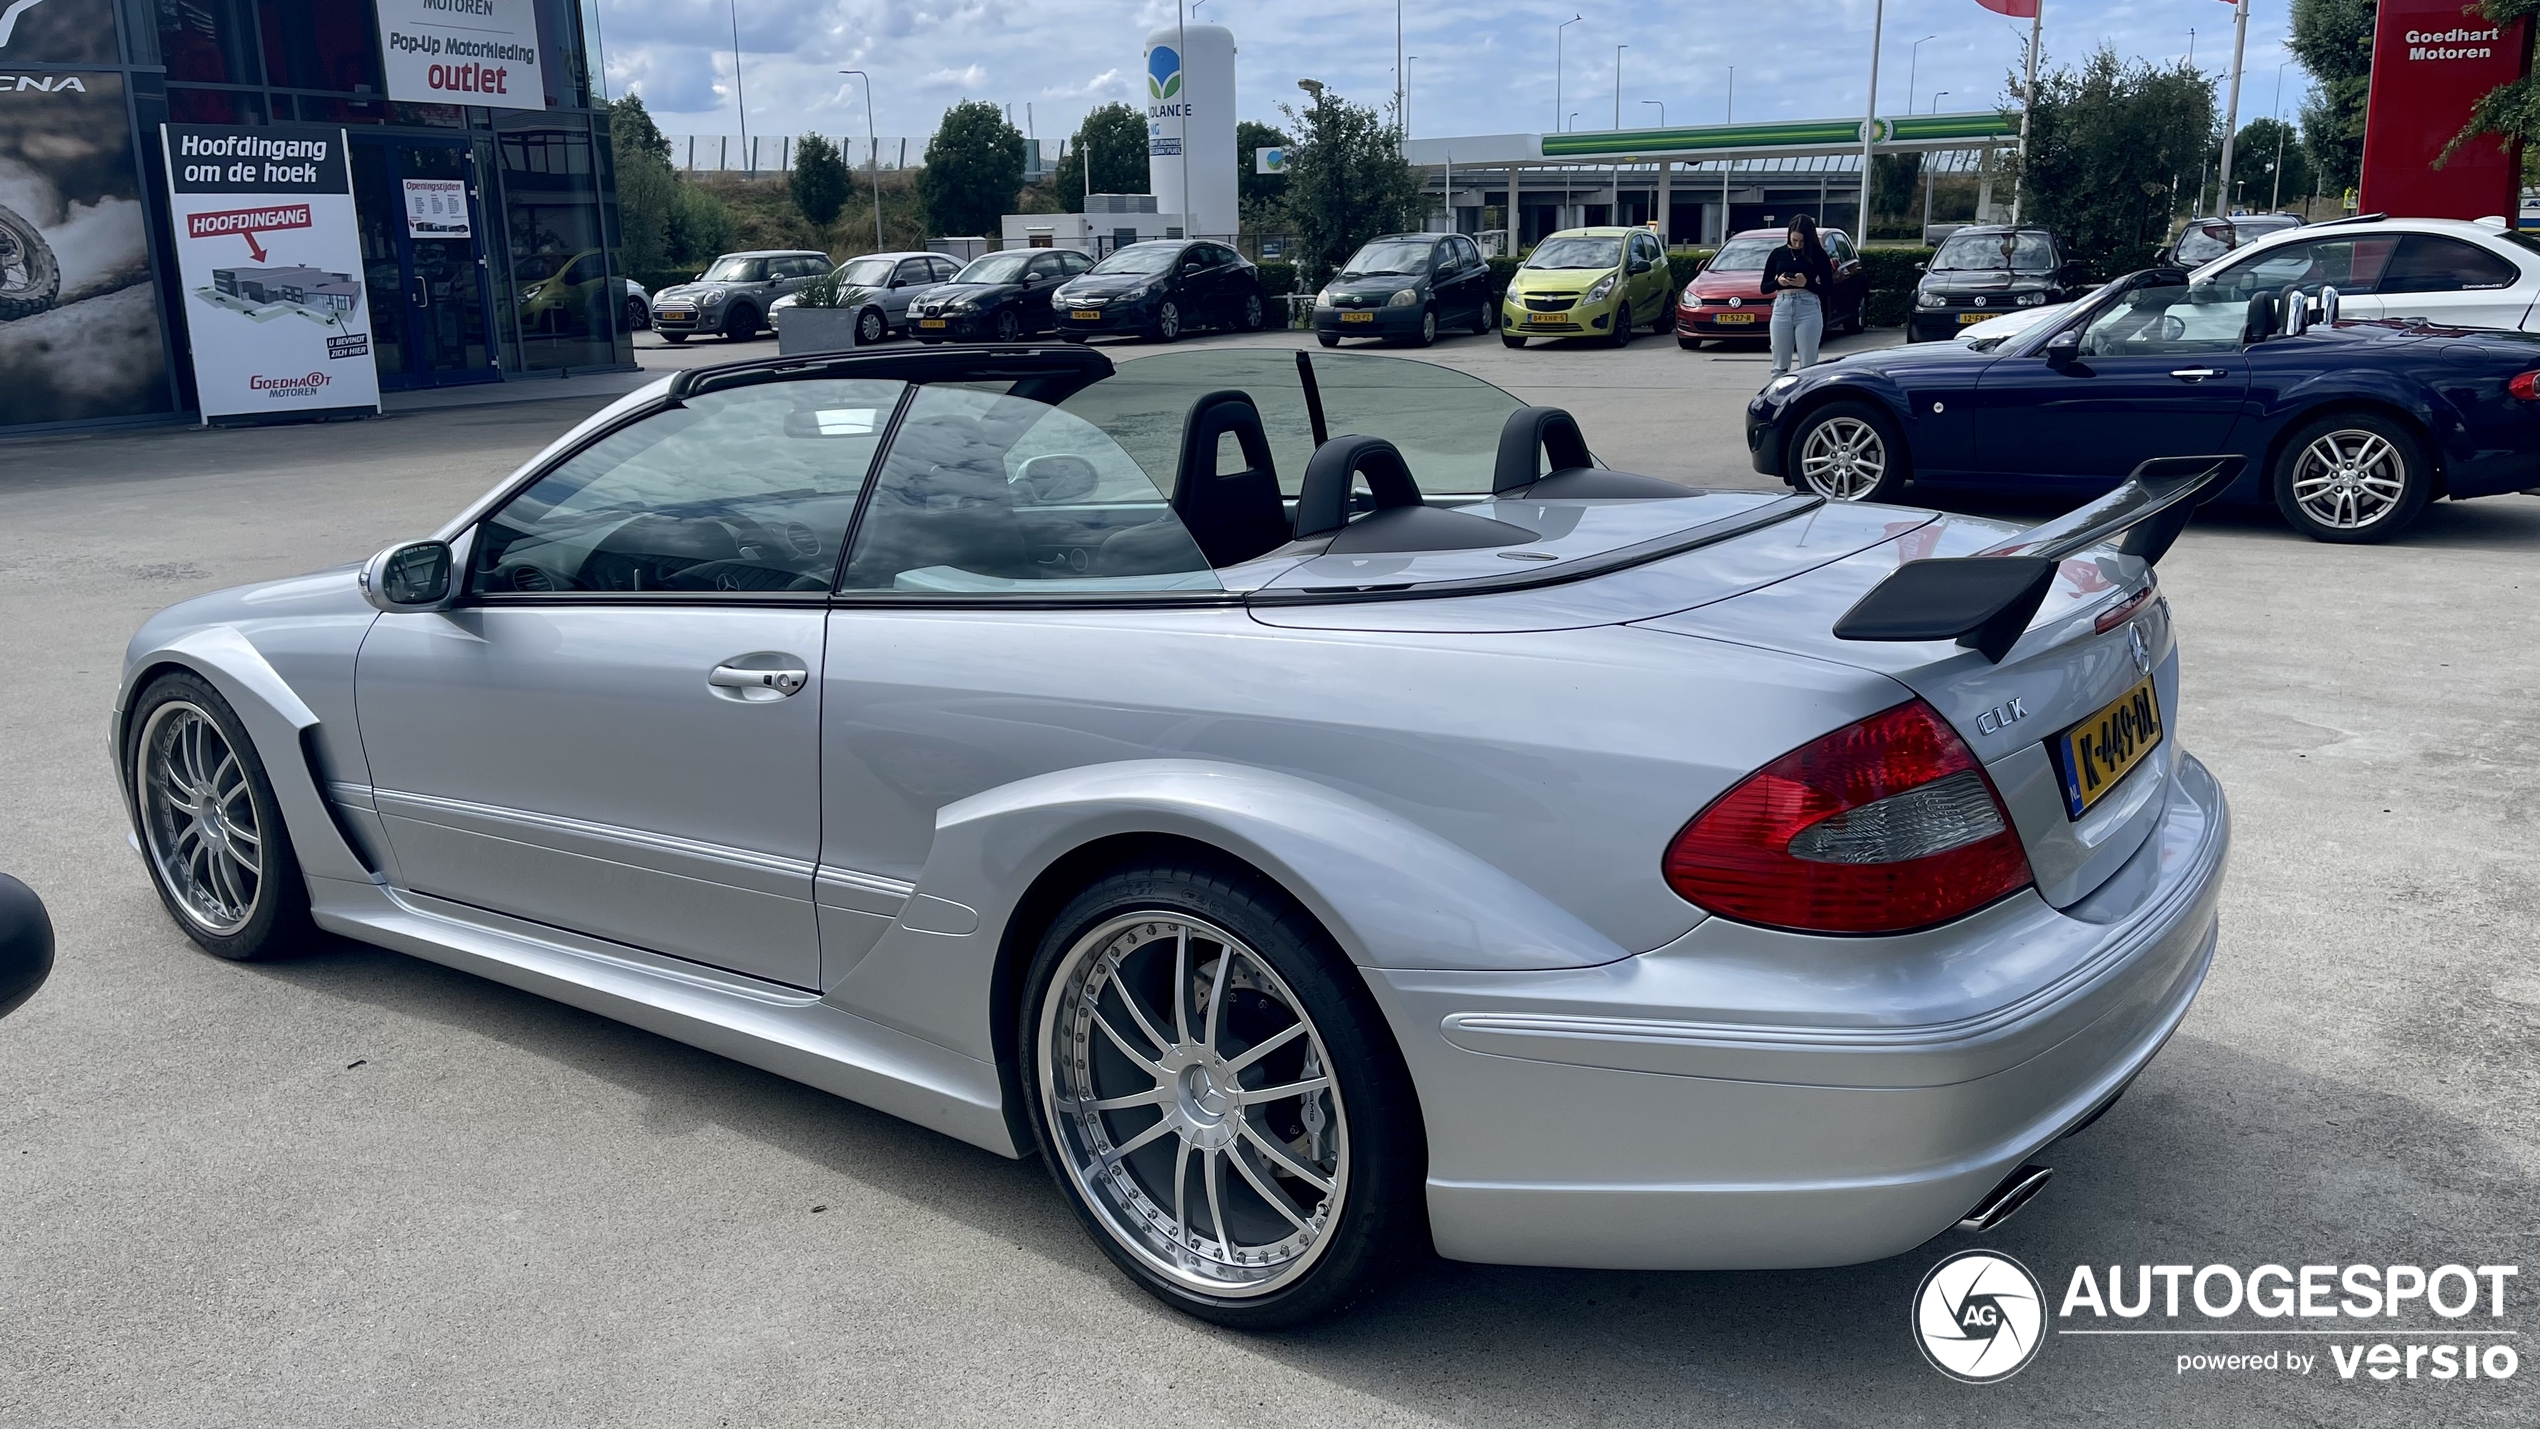 Very rare Mercedes-Benz CLK DTM AMG Cabriolet is spotted in Bodegraven